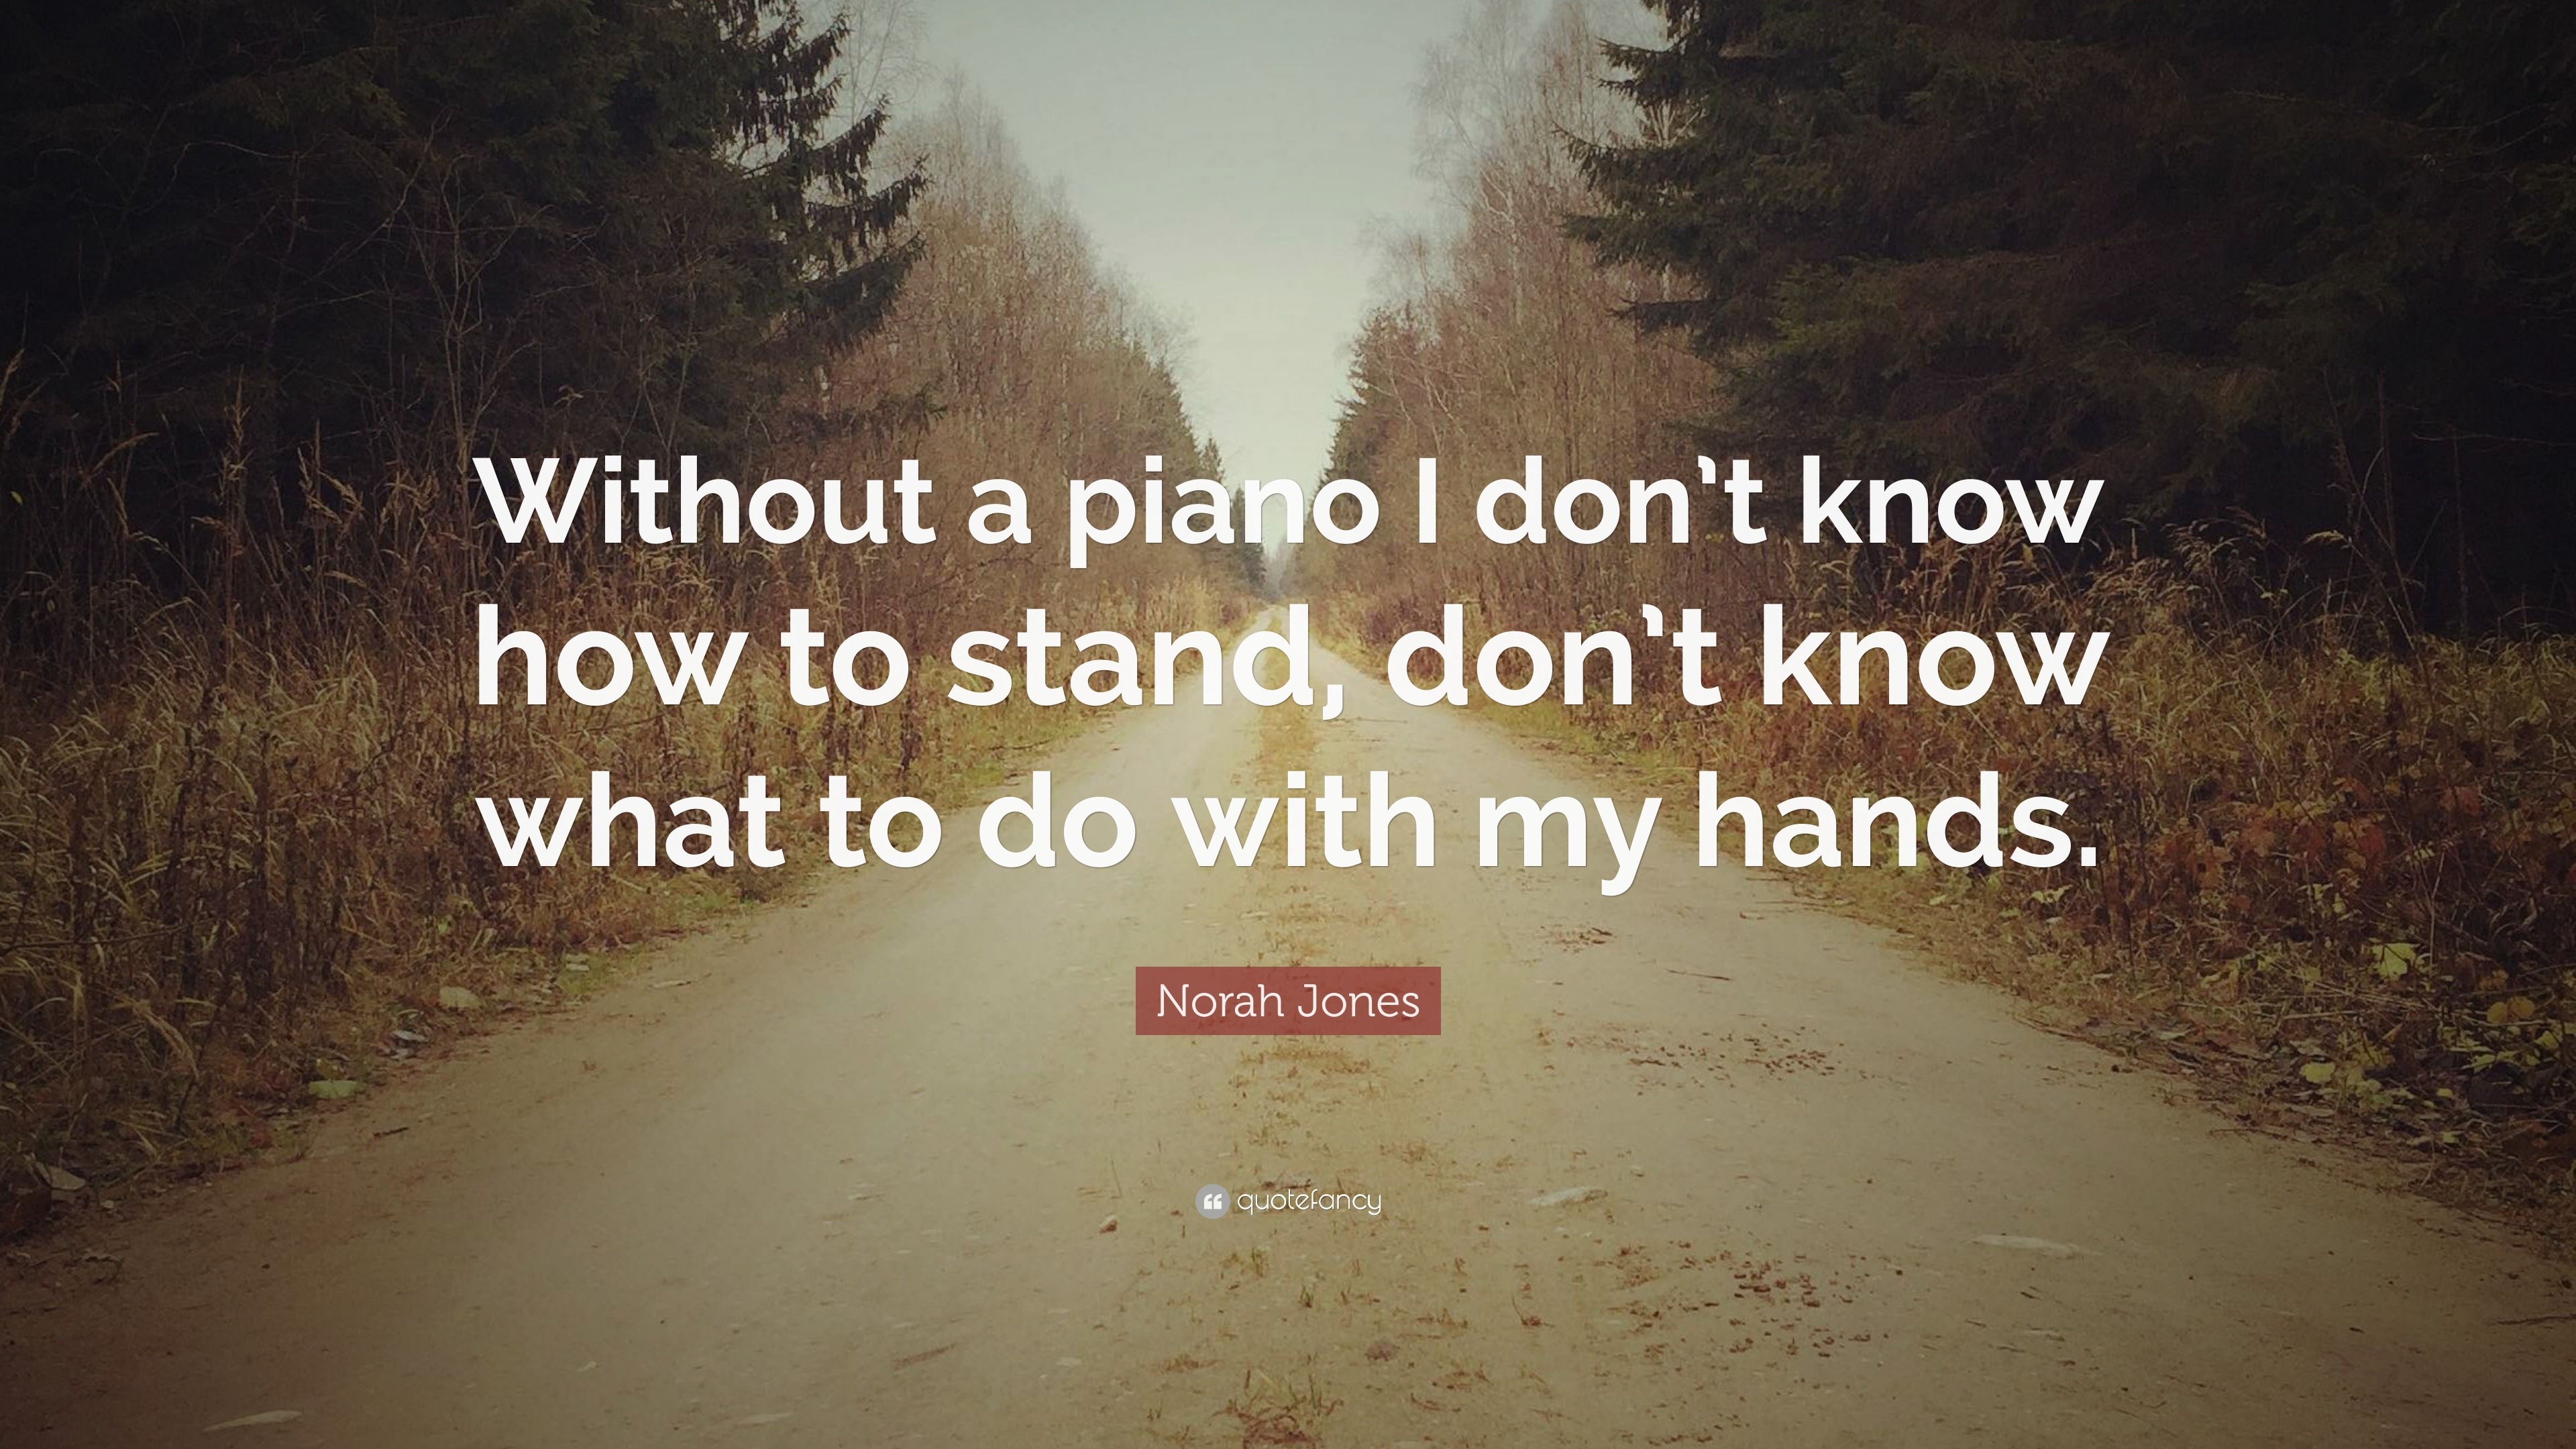 Norah Jones Quote Without A Piano I Don T Know How To Stand Don T Know What To Do With My Hands 7 Wallpapers Quotefancy